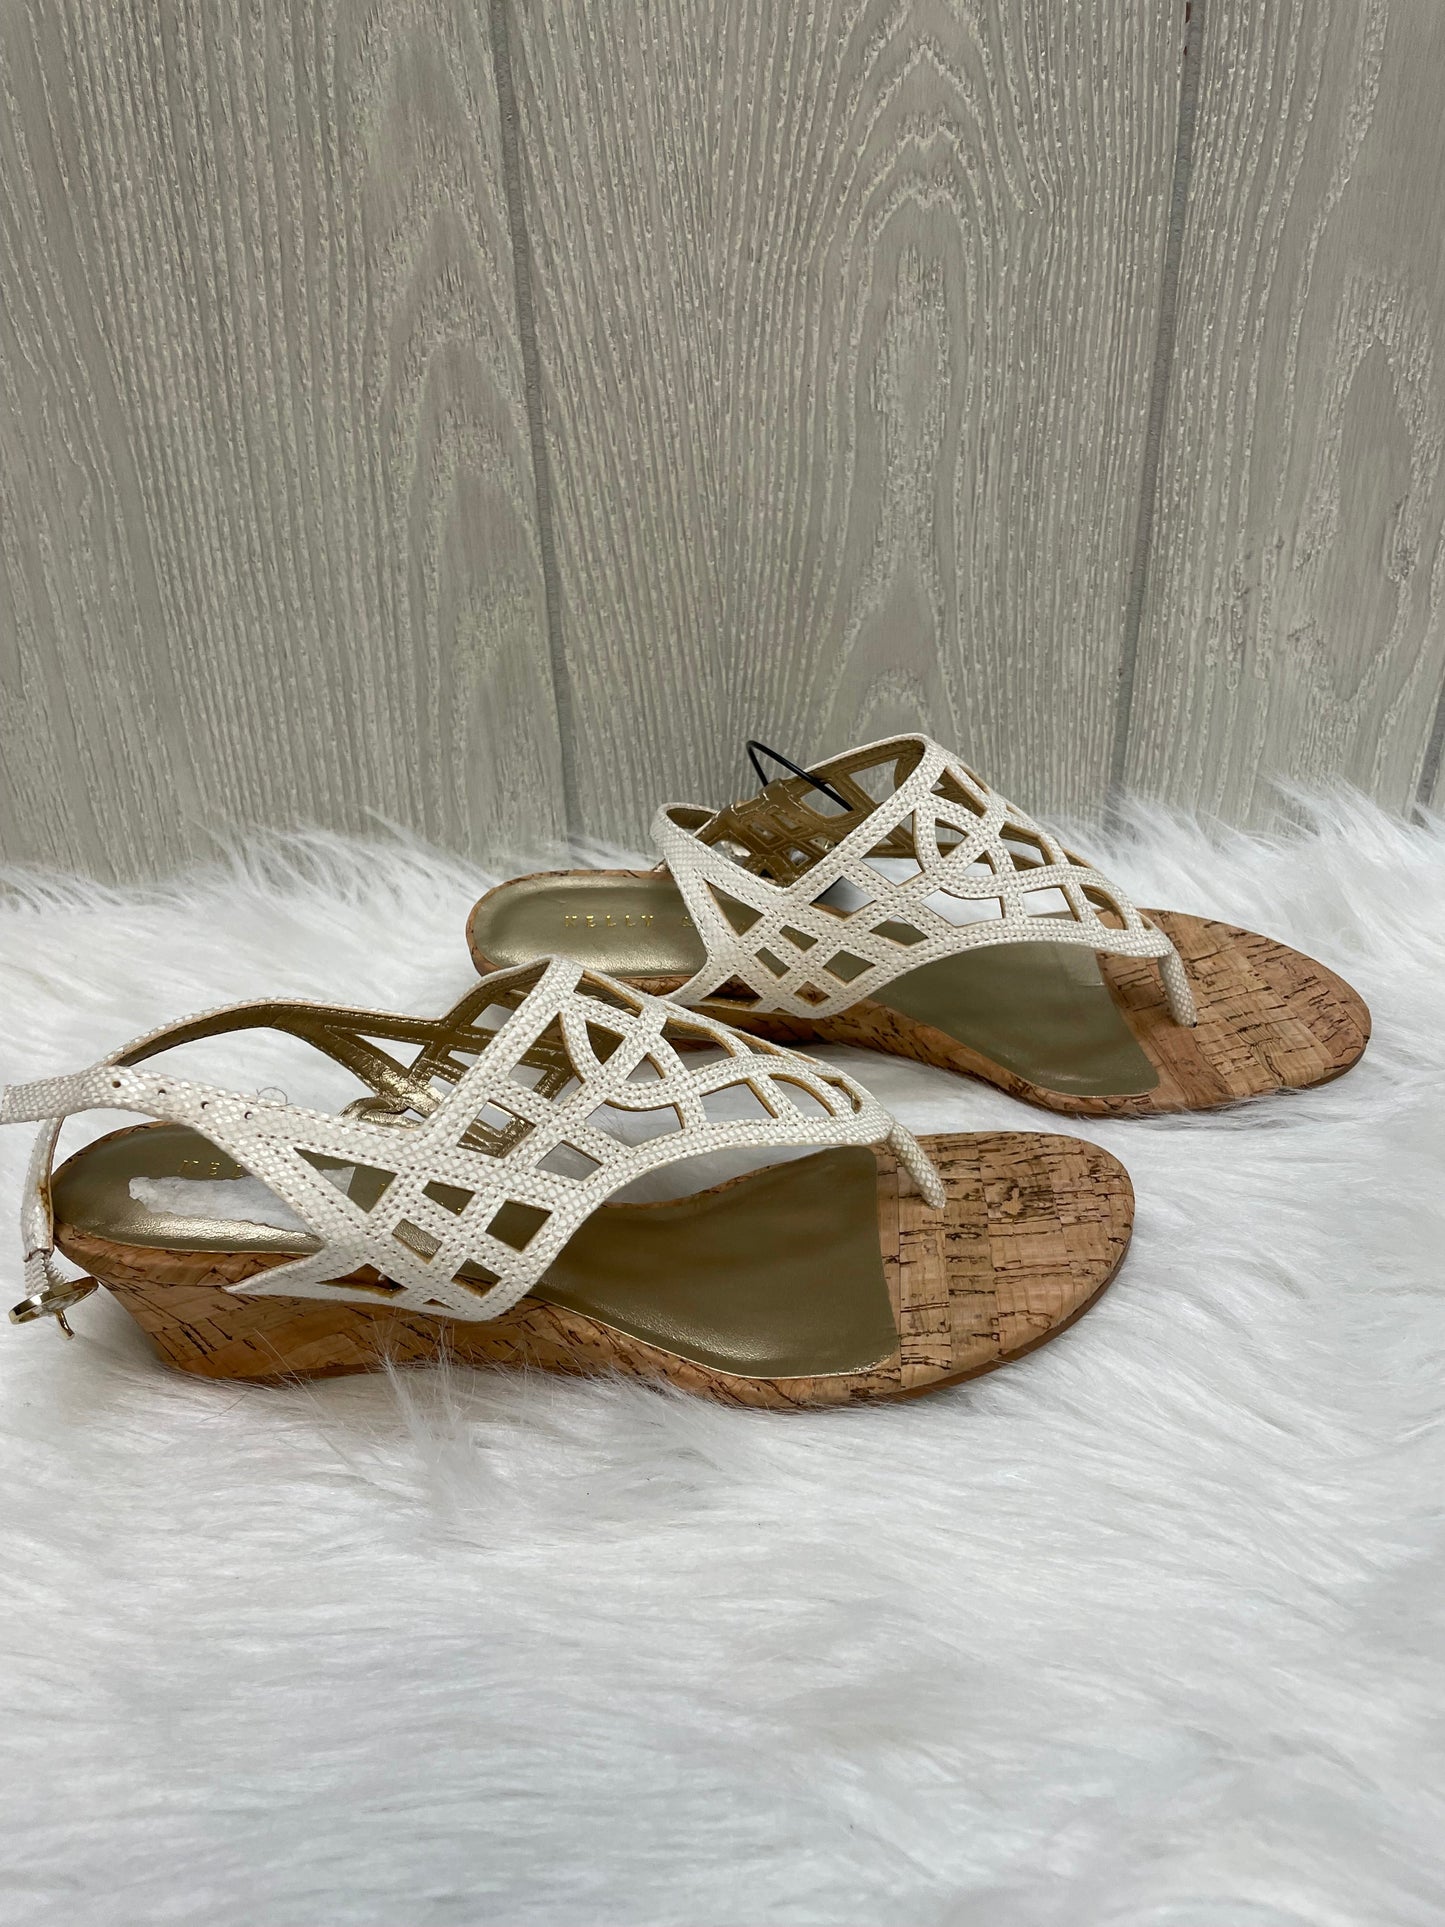 White Sandals Heels Wedge Kelly And Katie, Size 7